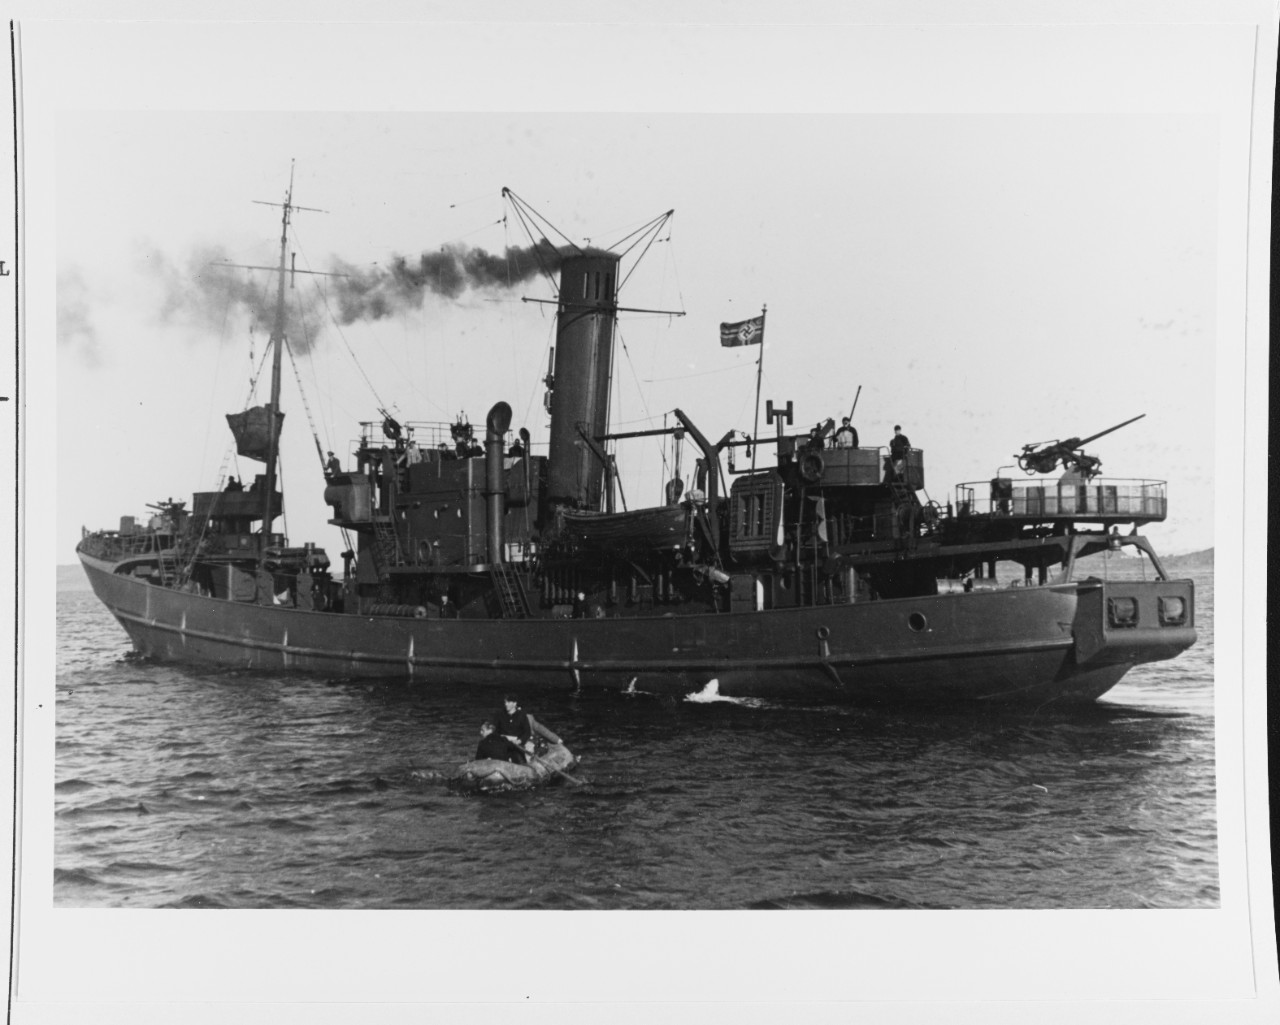 A German Anti-Submarine Patrol Vessel Awaiting The Arrival Of Her Mail.